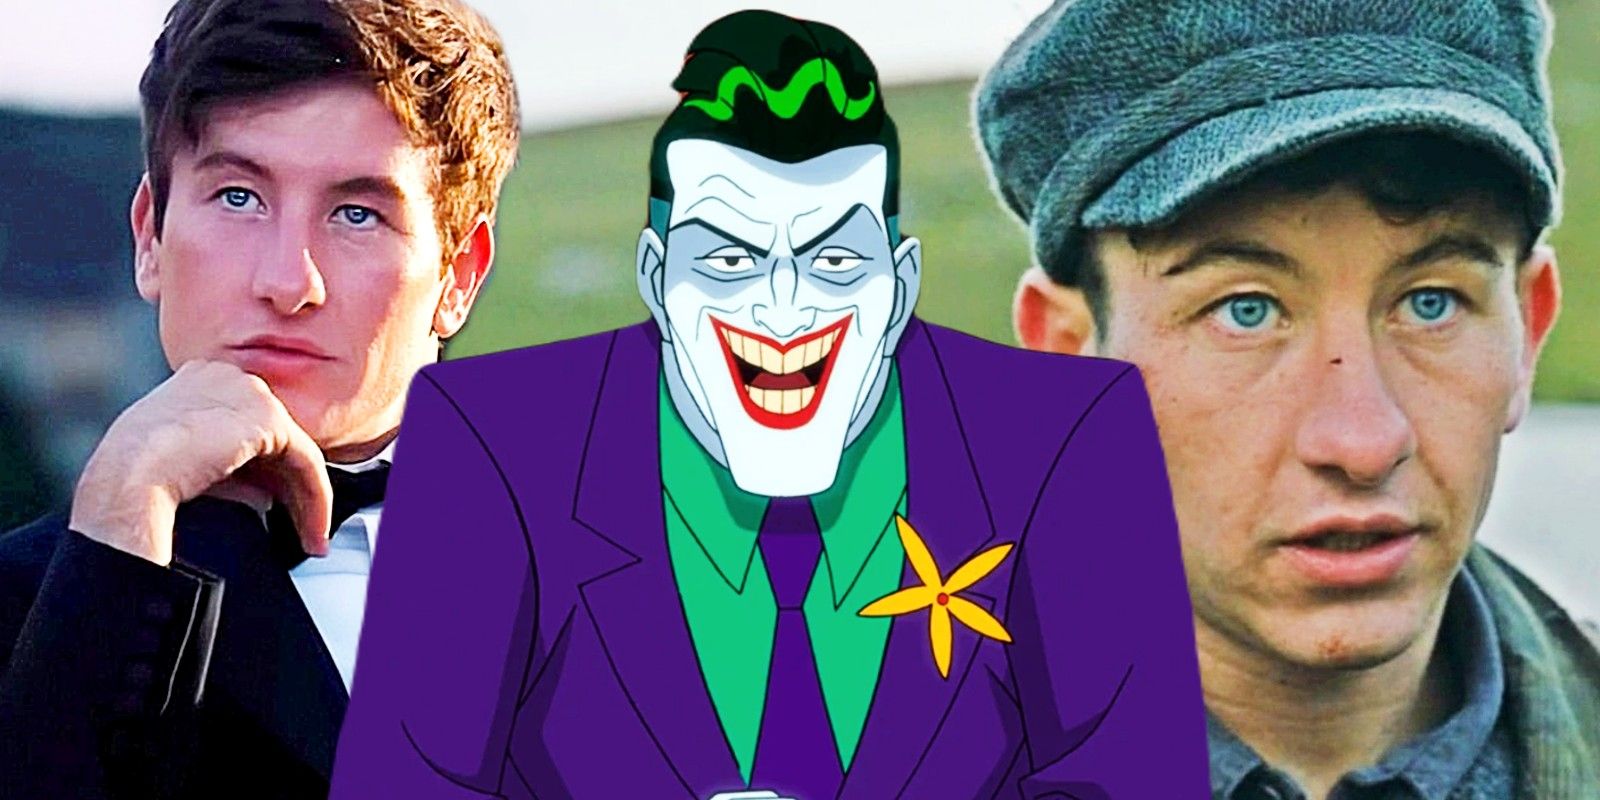 Barry Keoghan from Saltburn and The Banshees of Inisherin and The Joker from Harley Quinn